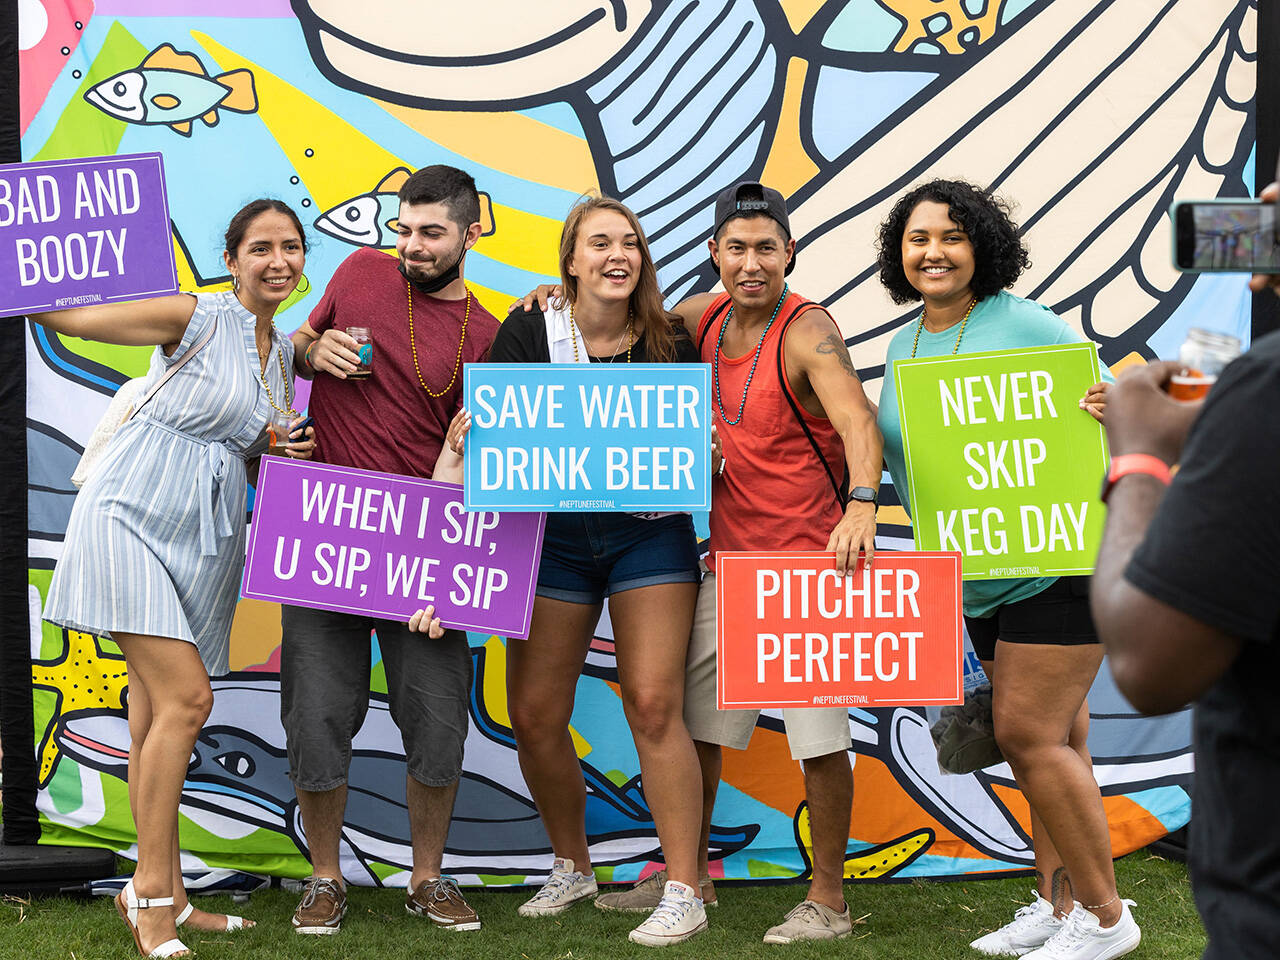 Group posing with punny signs during Coastal Craft Beer Festival